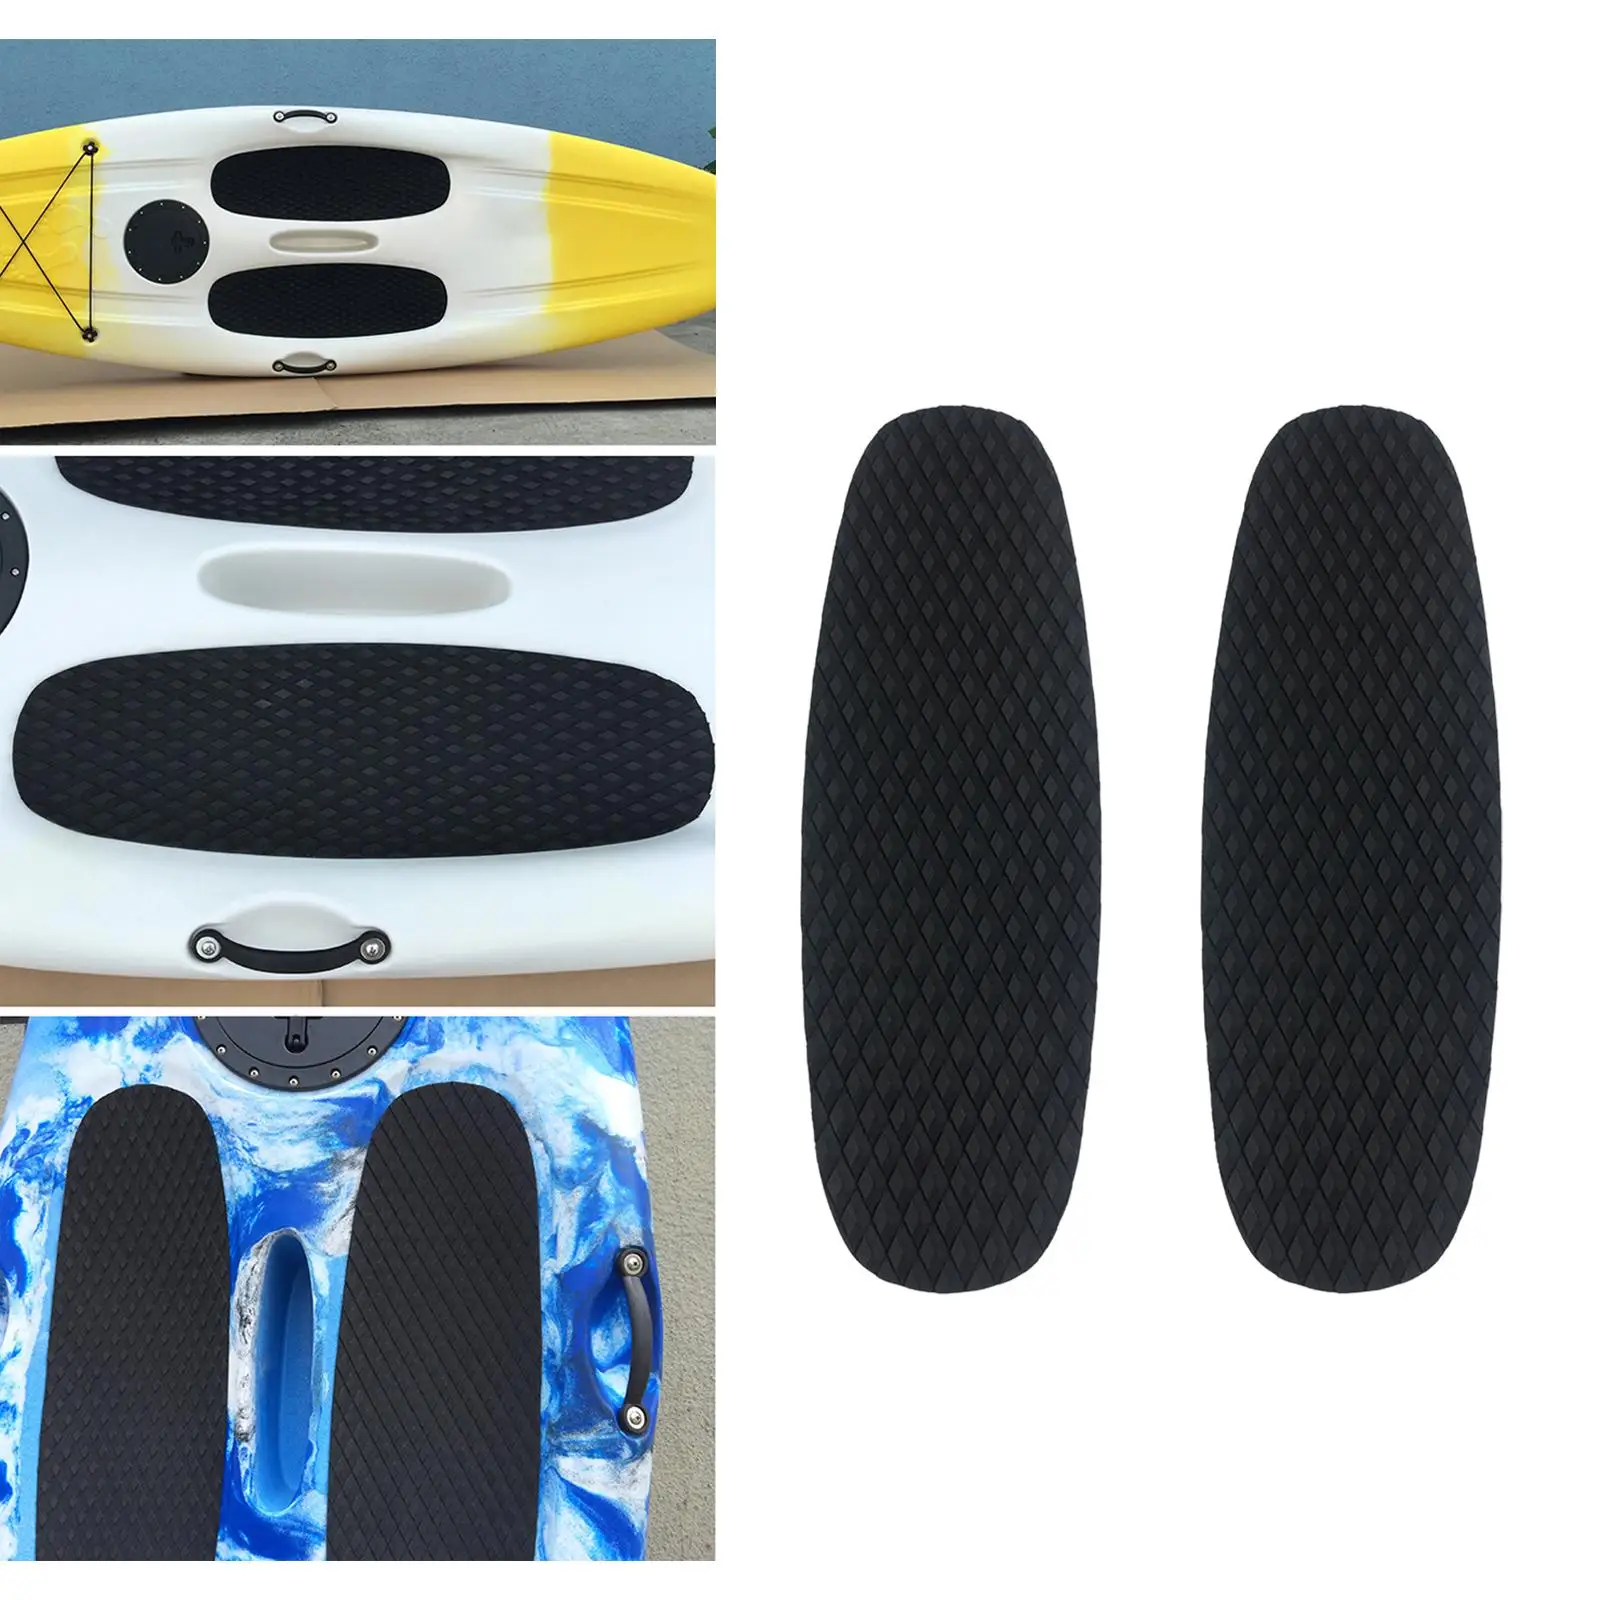 EVA Surfboard Traction Pad Deck Grip Mat Surfing Padding Paddle Board Adhesive Non Slip DIY Surf for Snowboarding Longboard Boat